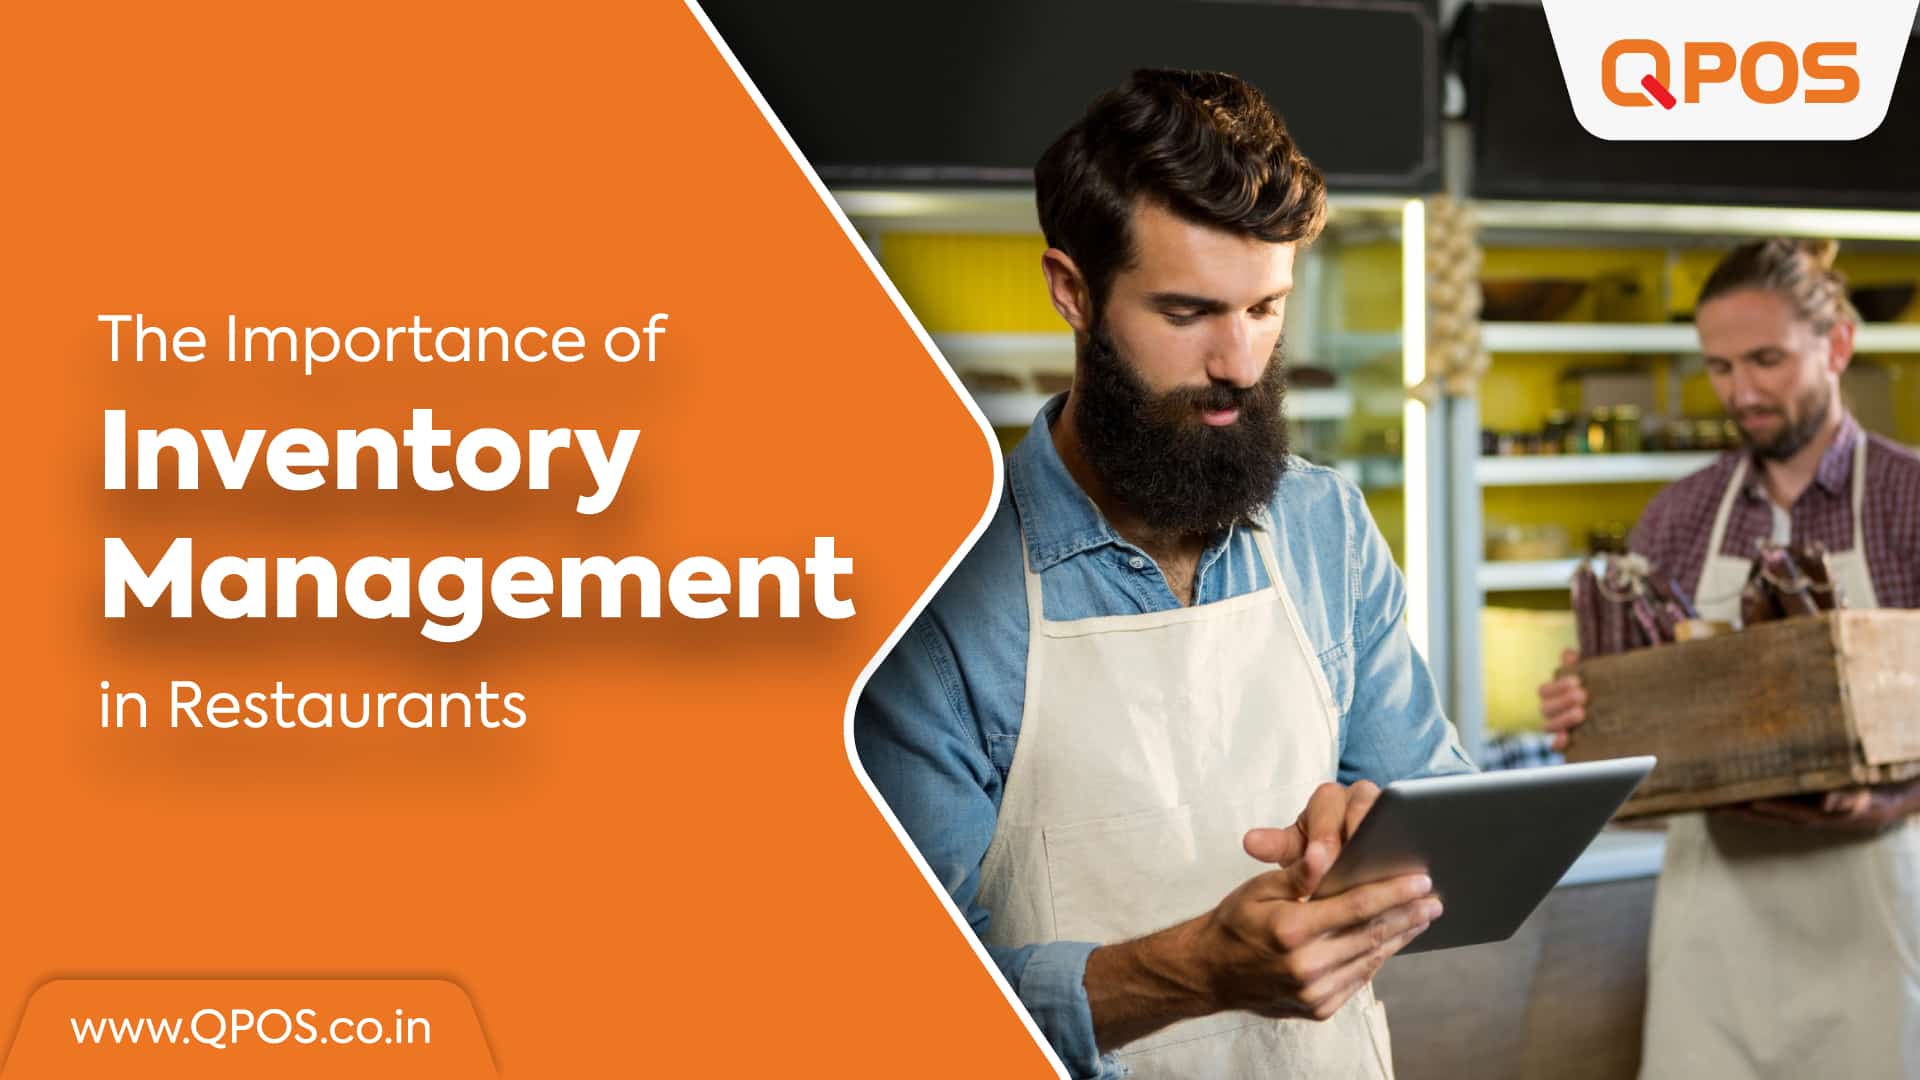 The Importance of Inventory Management in Restaurants